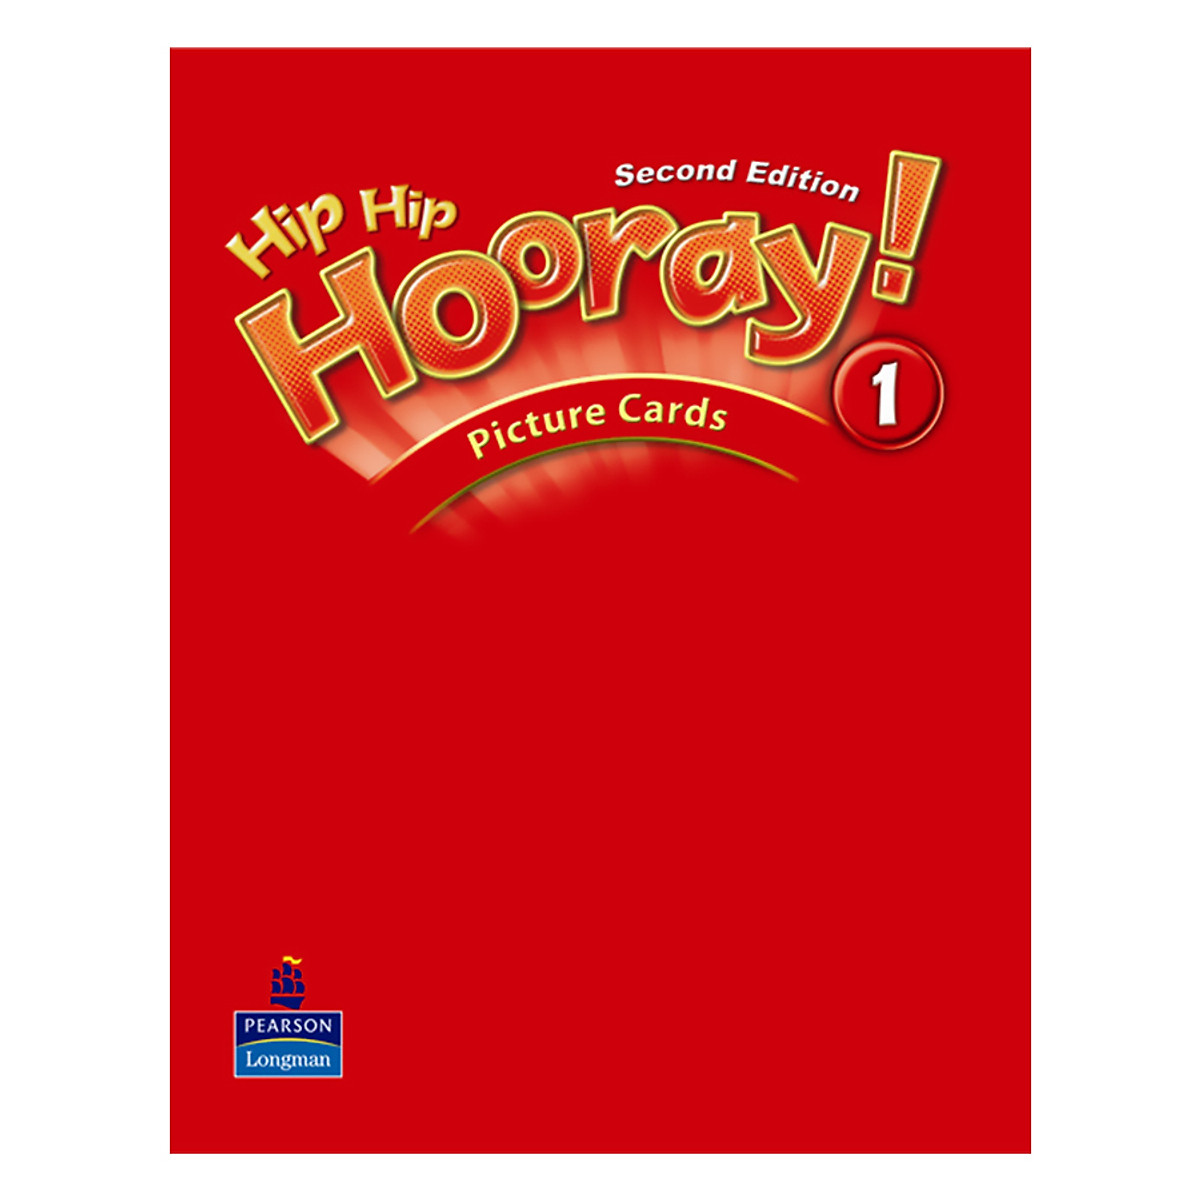 Hip Hip Hooray! 1: Picture Cards 